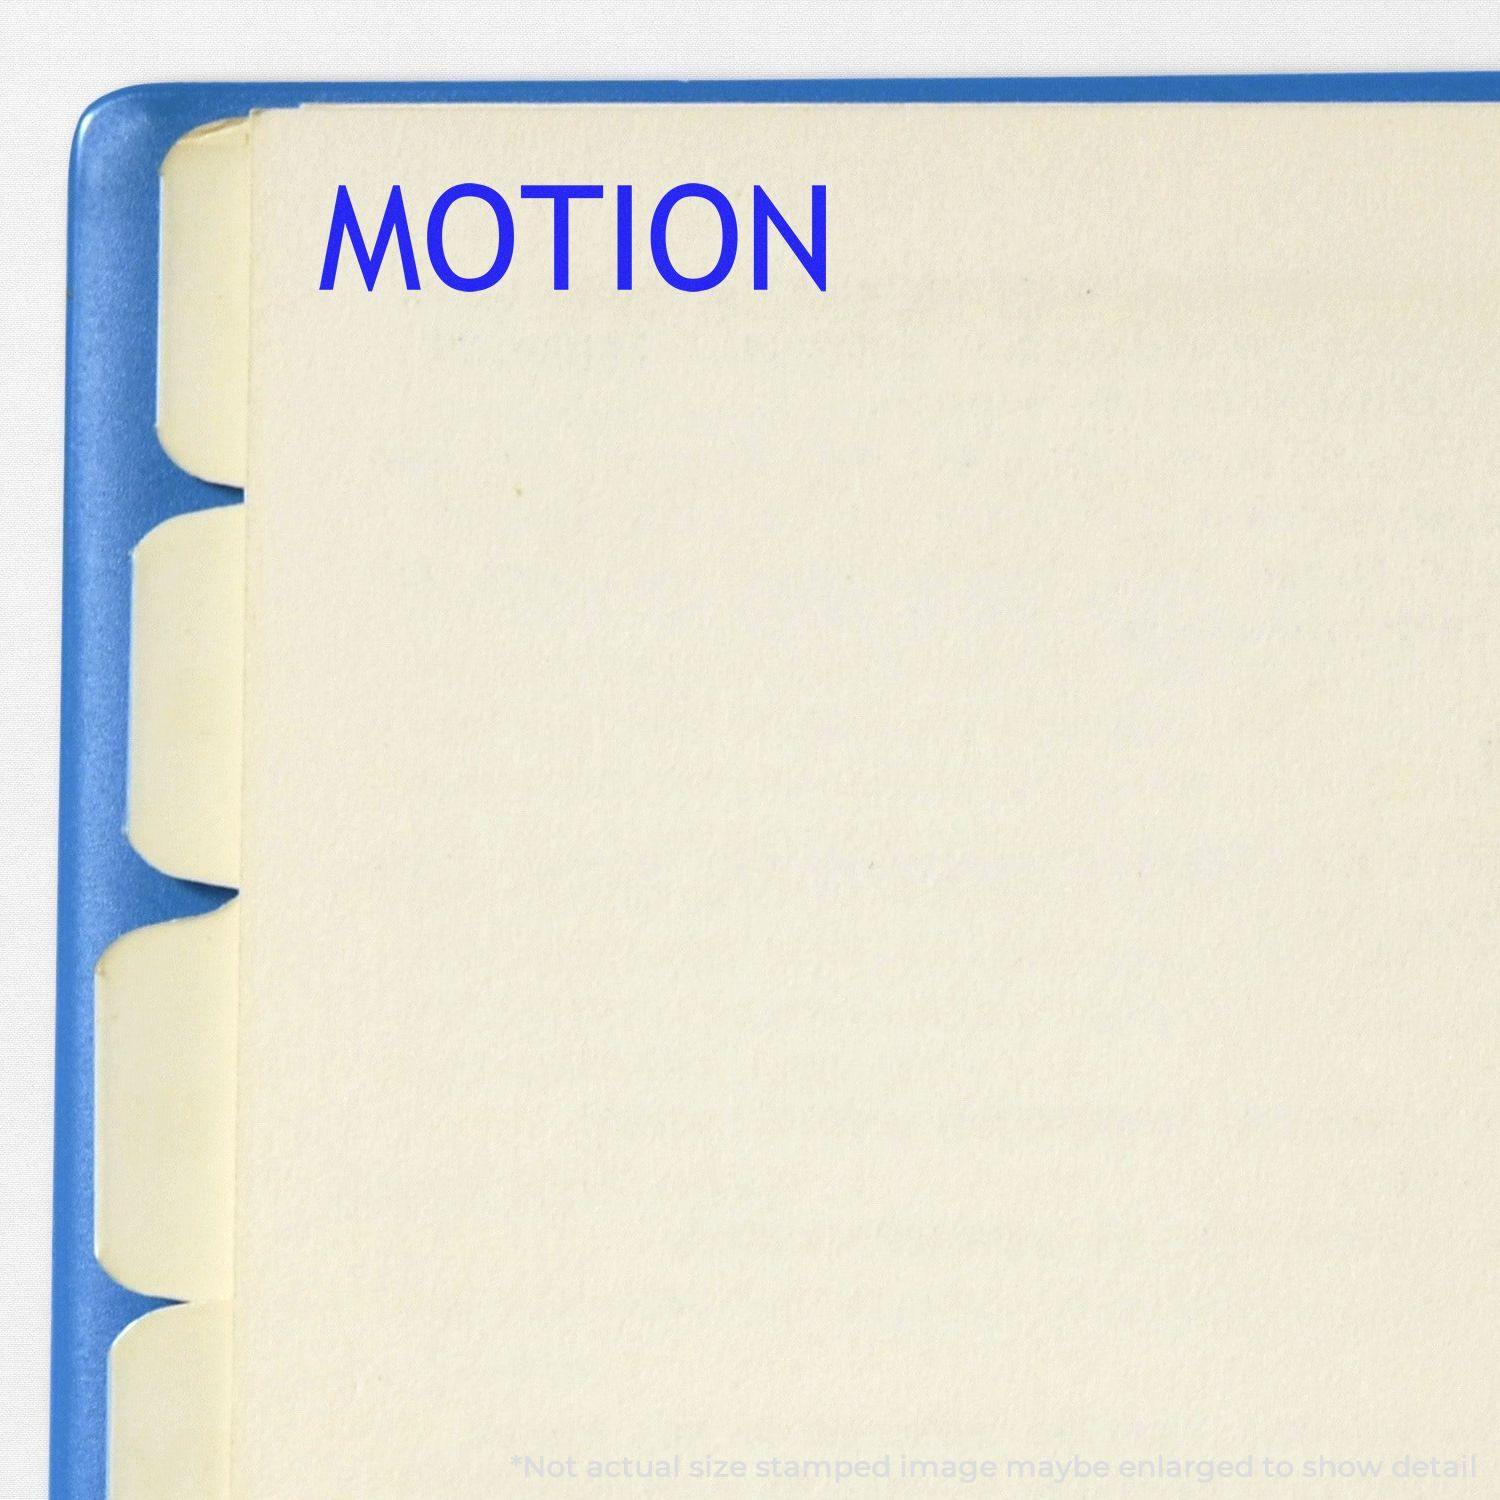 A stock office rubber stamp with a stamped image showing how the text "MOTION" in a large font is displayed after stamping.